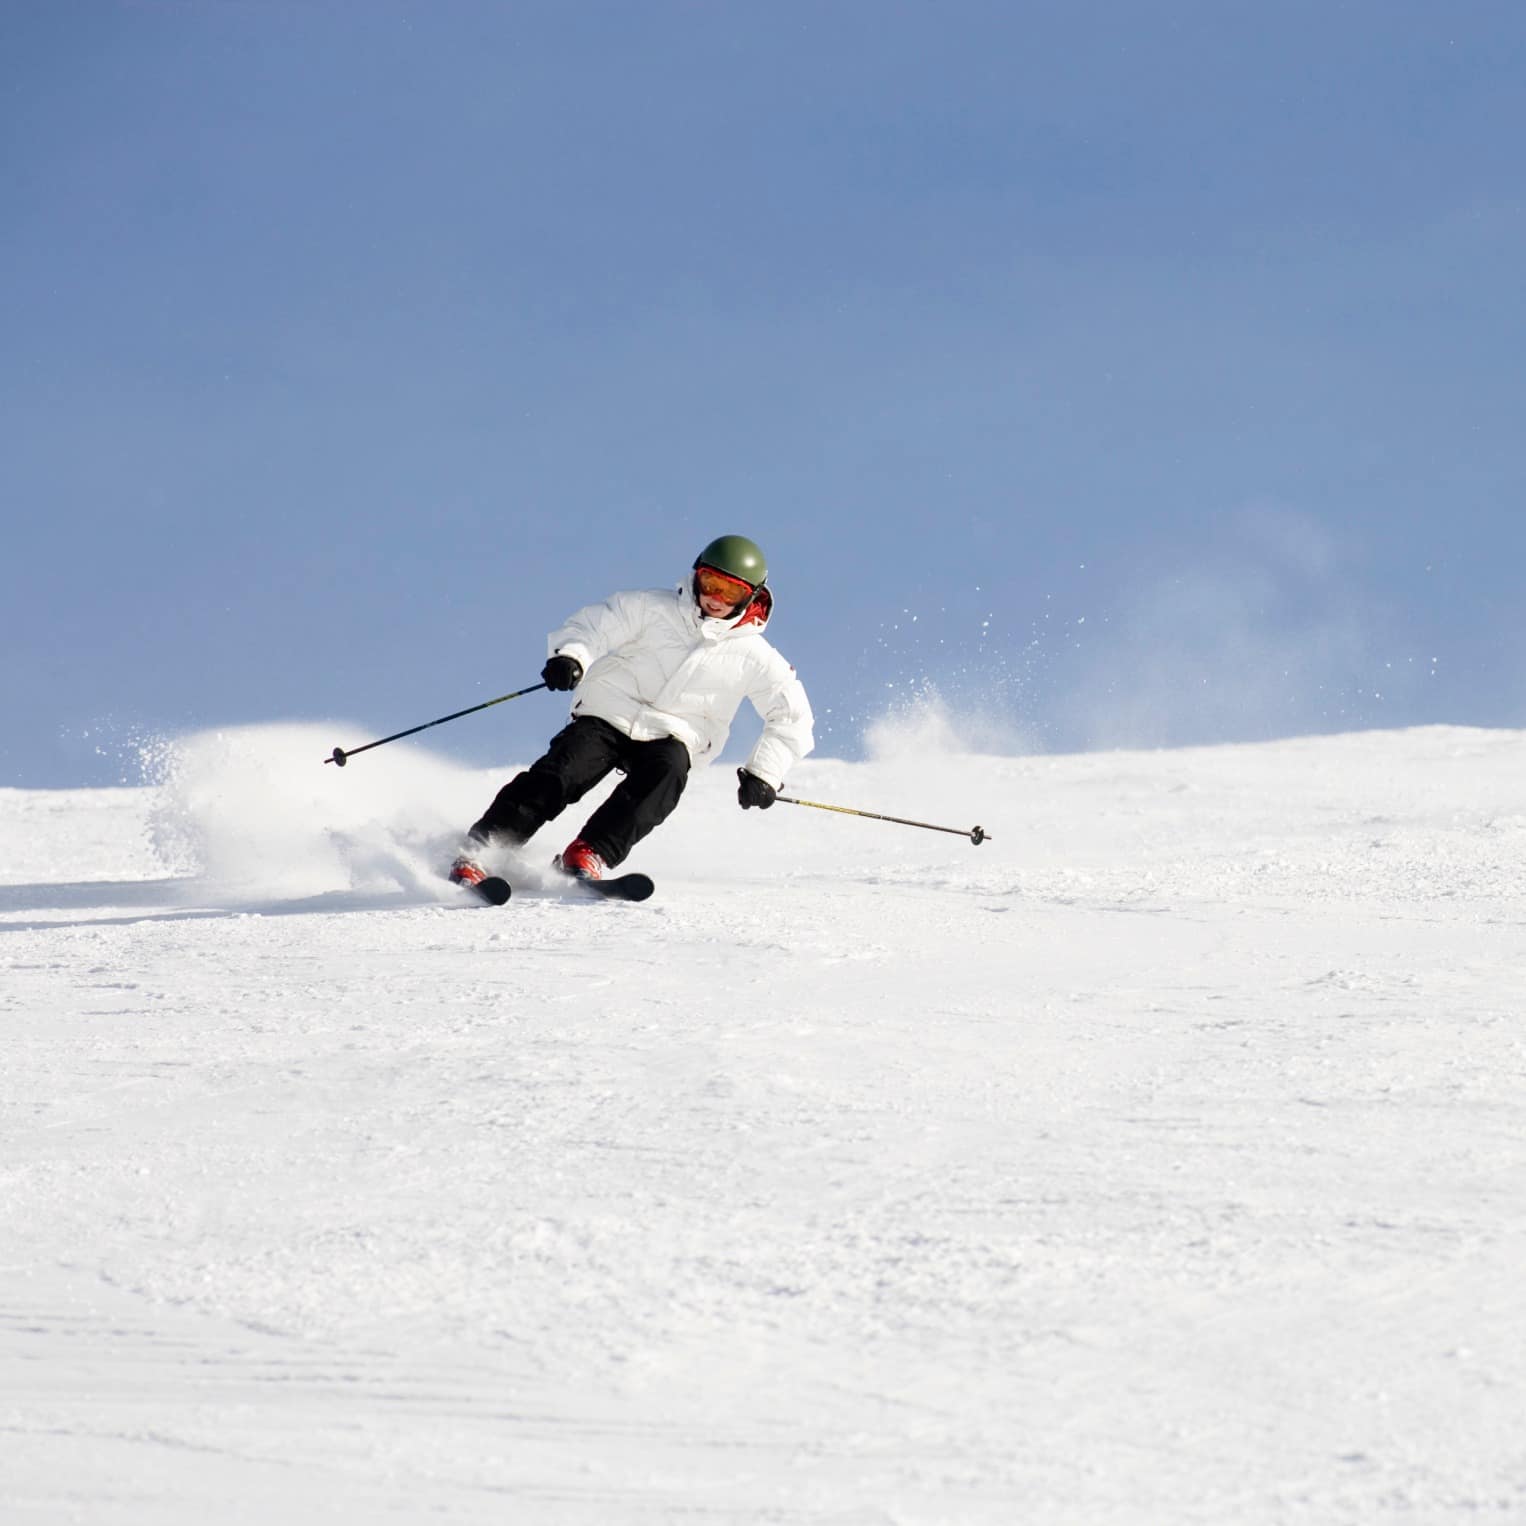 Skier skiing down a snow-covered slope